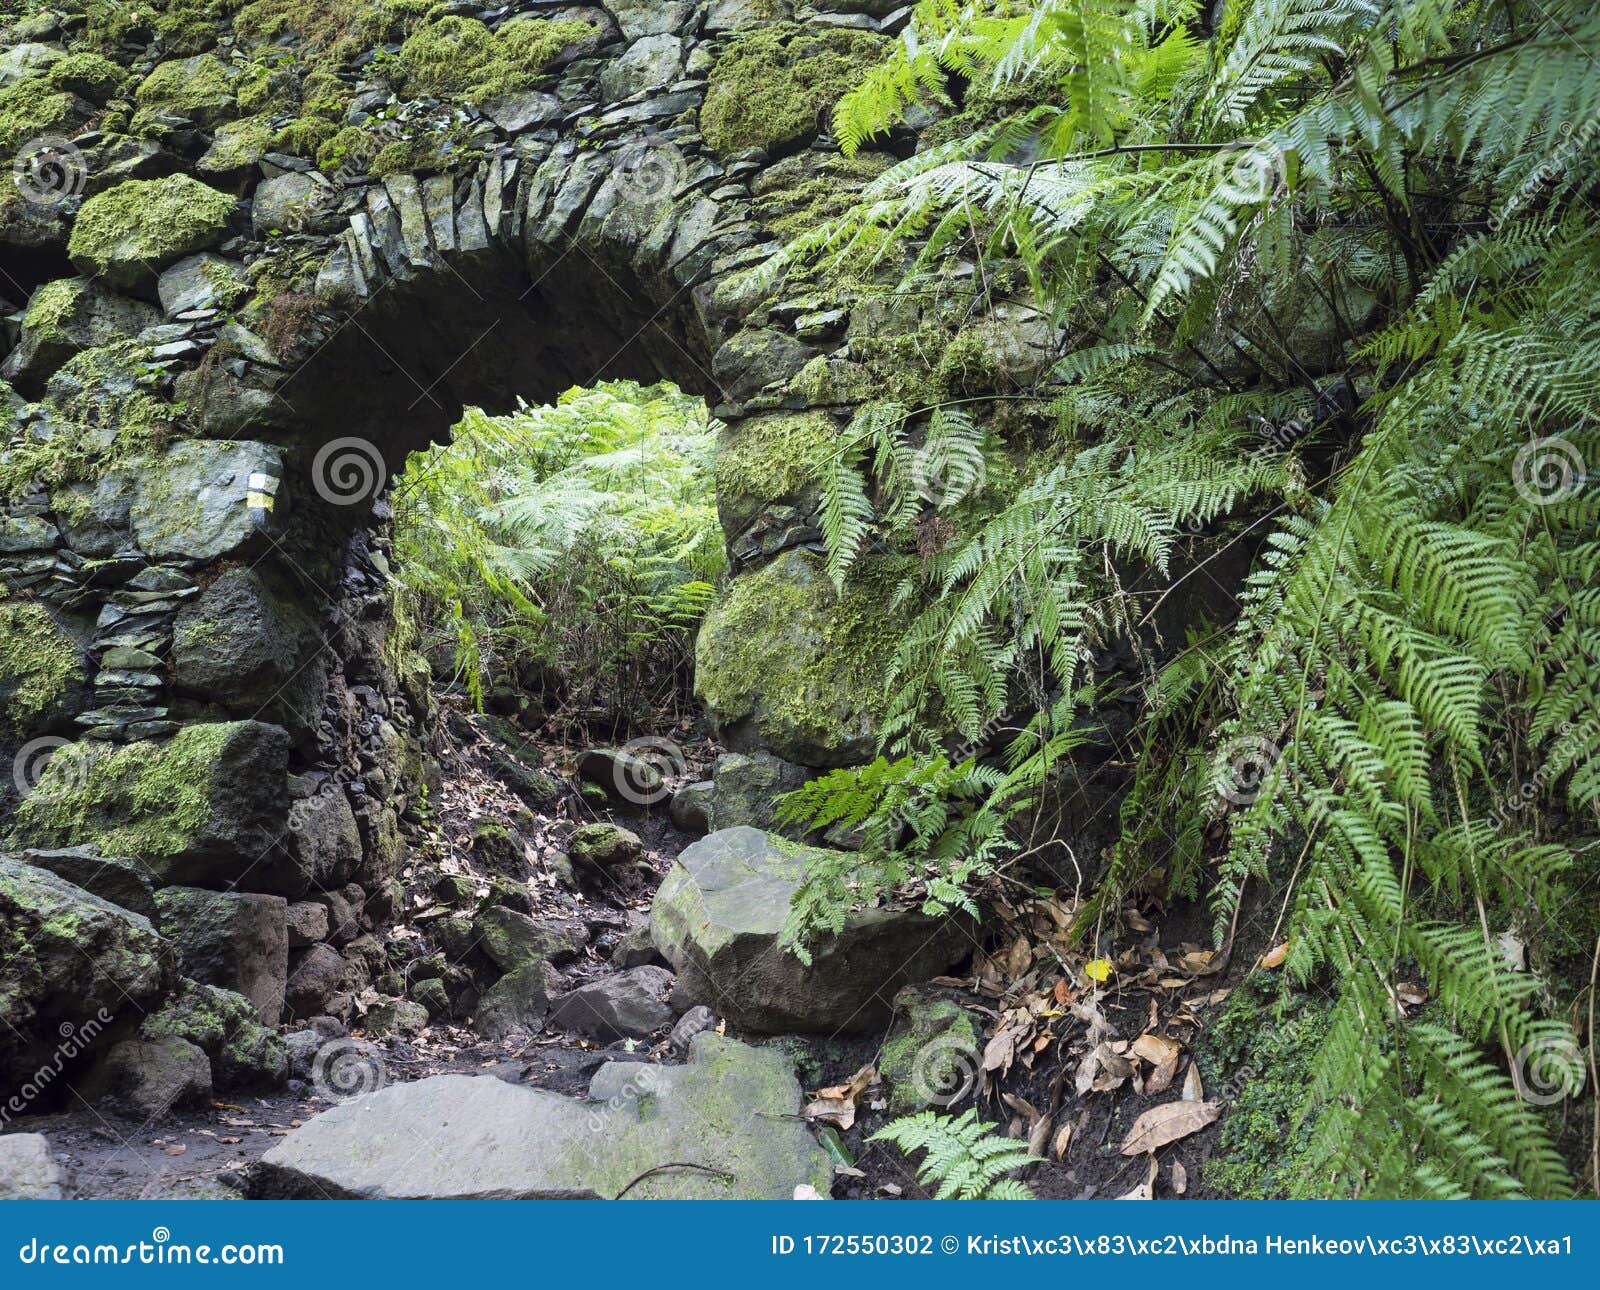 old stone aqueduct, water duct arc at cubo de la galga nature park, path in beautiful mysterious laurel forest